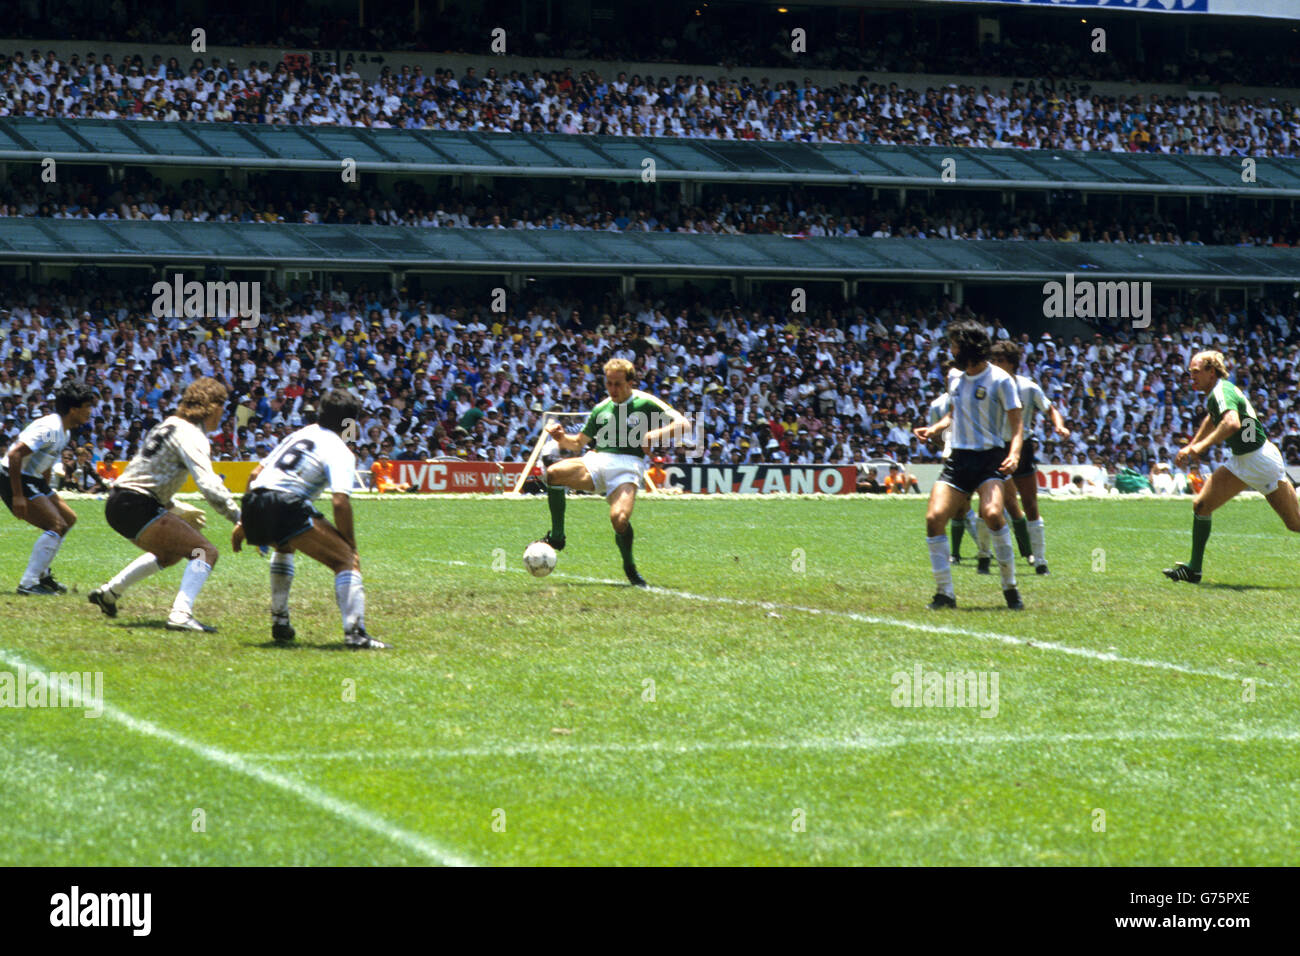 Soccer - 1986 FIFA World Cup - Final - Argentina v West Germany - Azteca Stadium, Mexico. Karl-Heinz Rummenigge scores for West Germany. Stock Photo